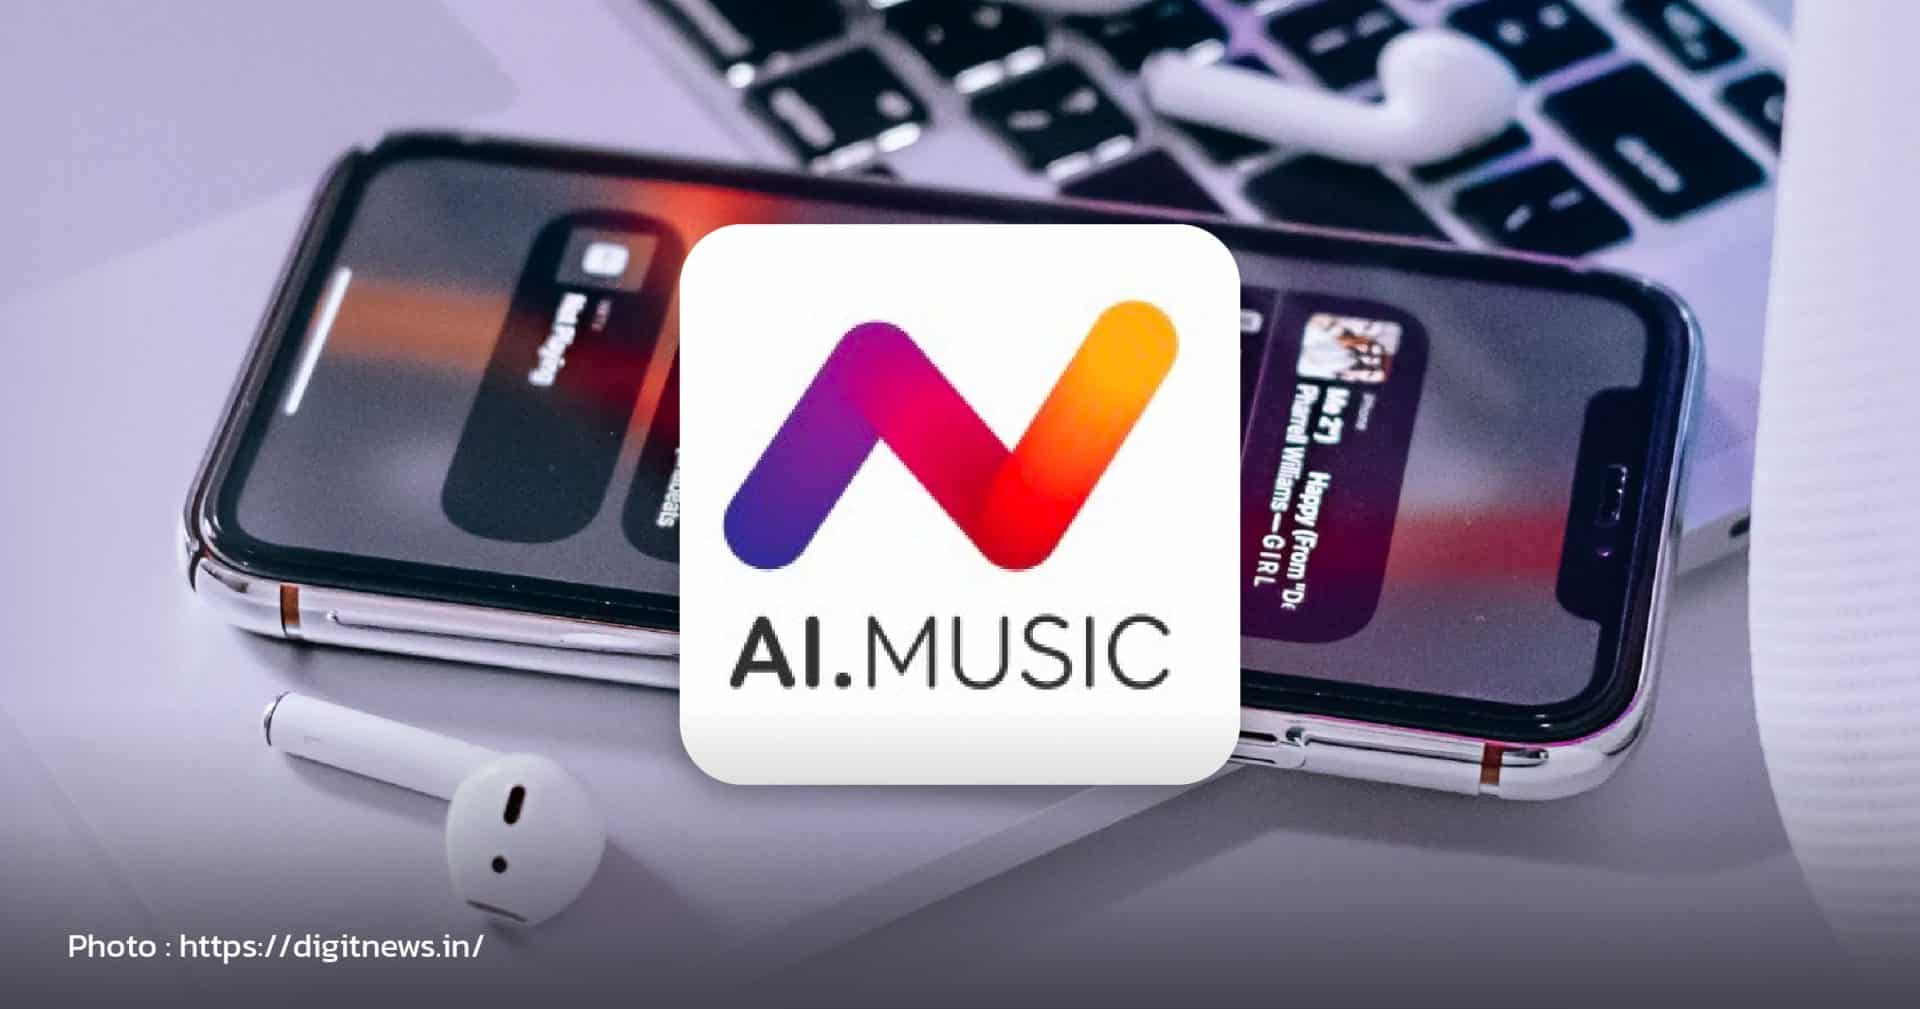 Apple AI Music News by Mission to the Moon